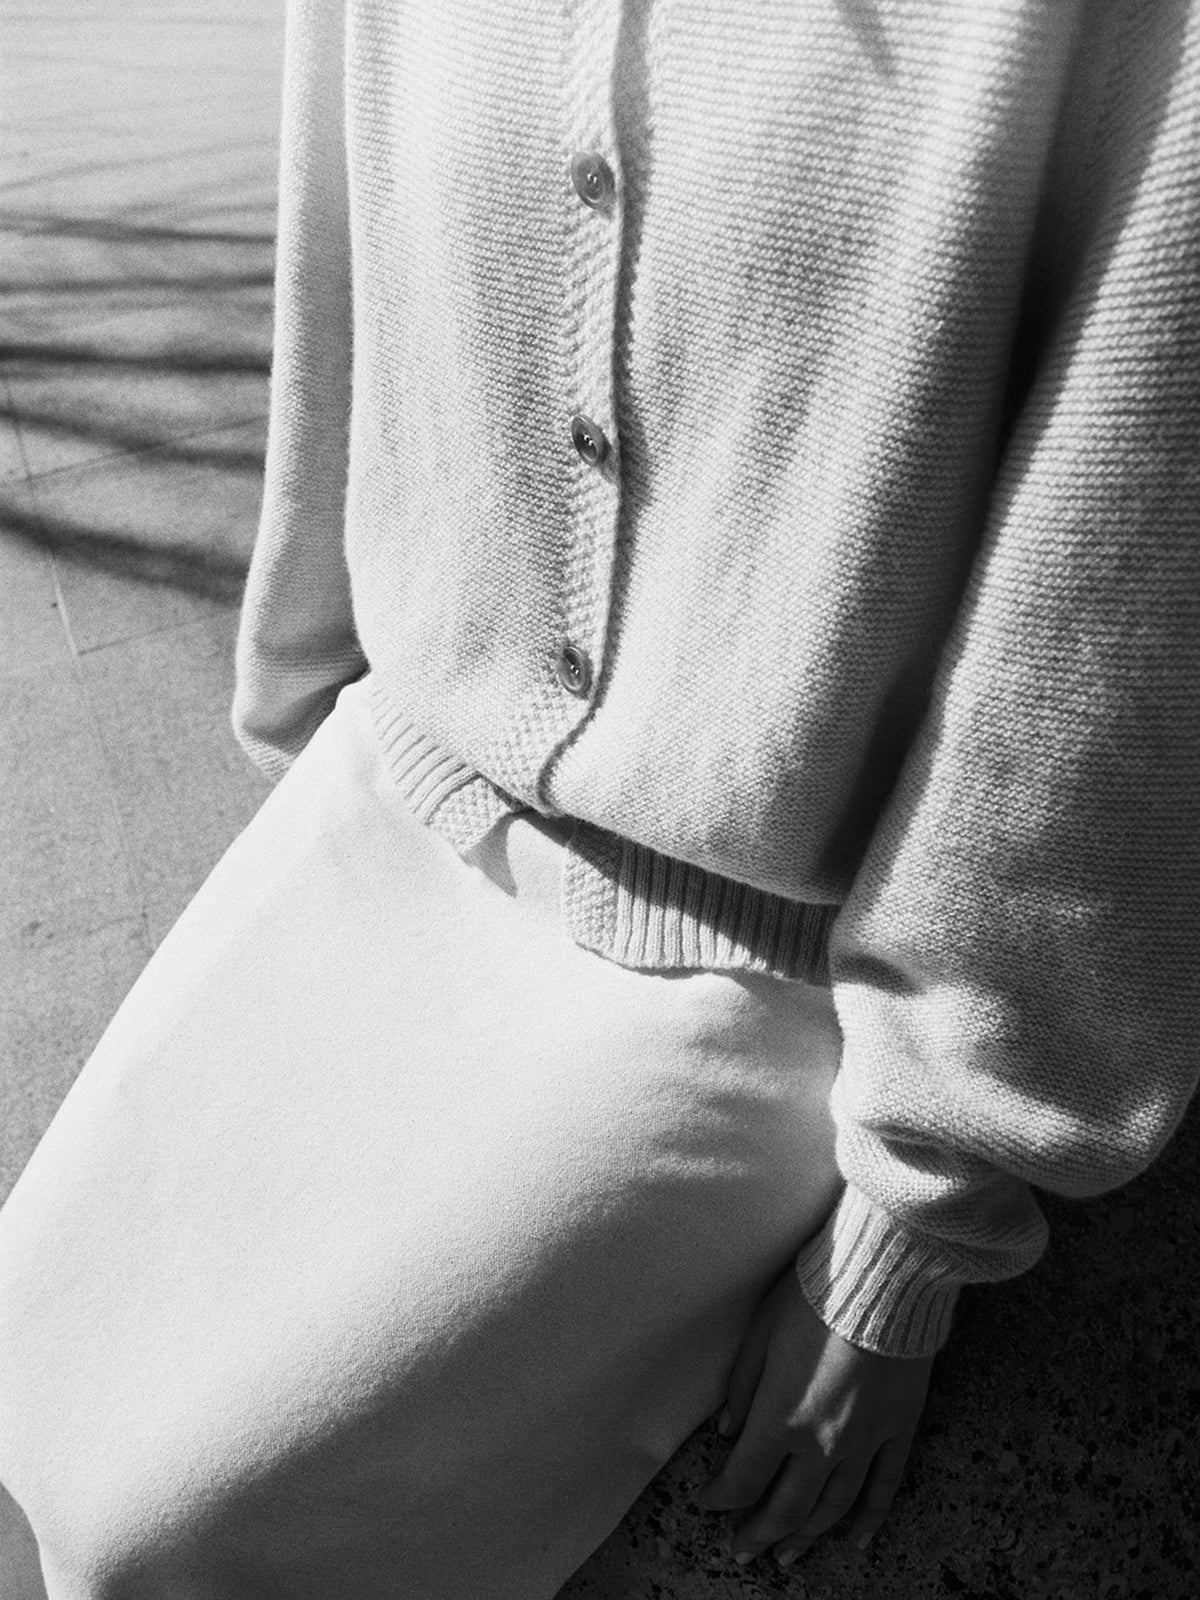 A person wearing a white skirt and an Italian air-spun merino wool Loft Cardigan in an oversized design by Francie.